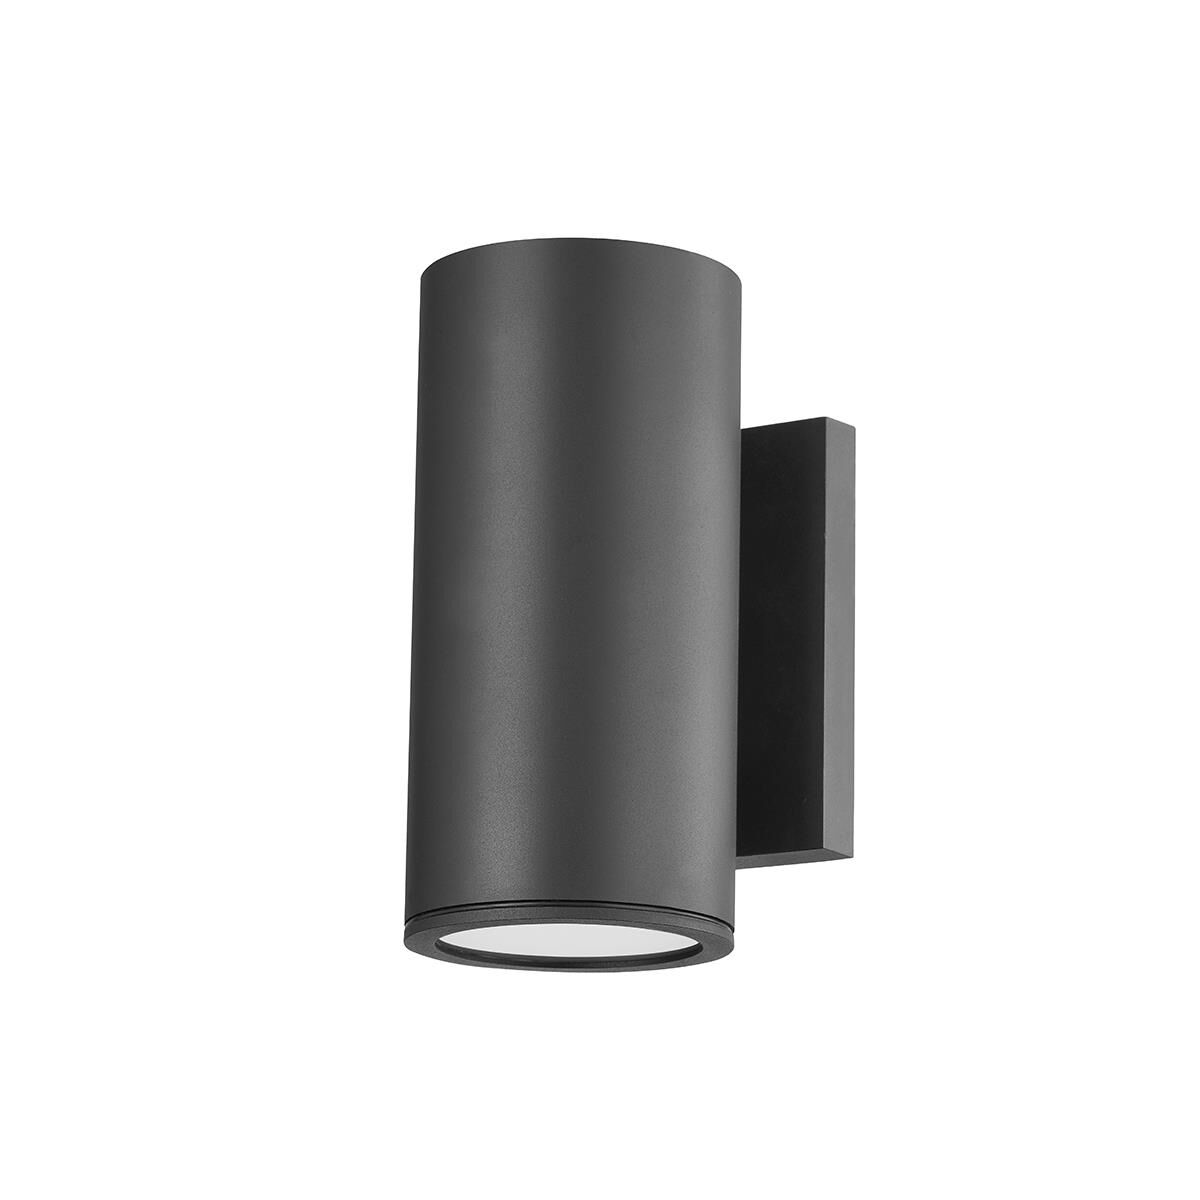 Photos - Chandelier / Lamp Troy Lighting Perry 4.5 Inch Outdoor Wall Light Perry - B2309-TBK - Modern